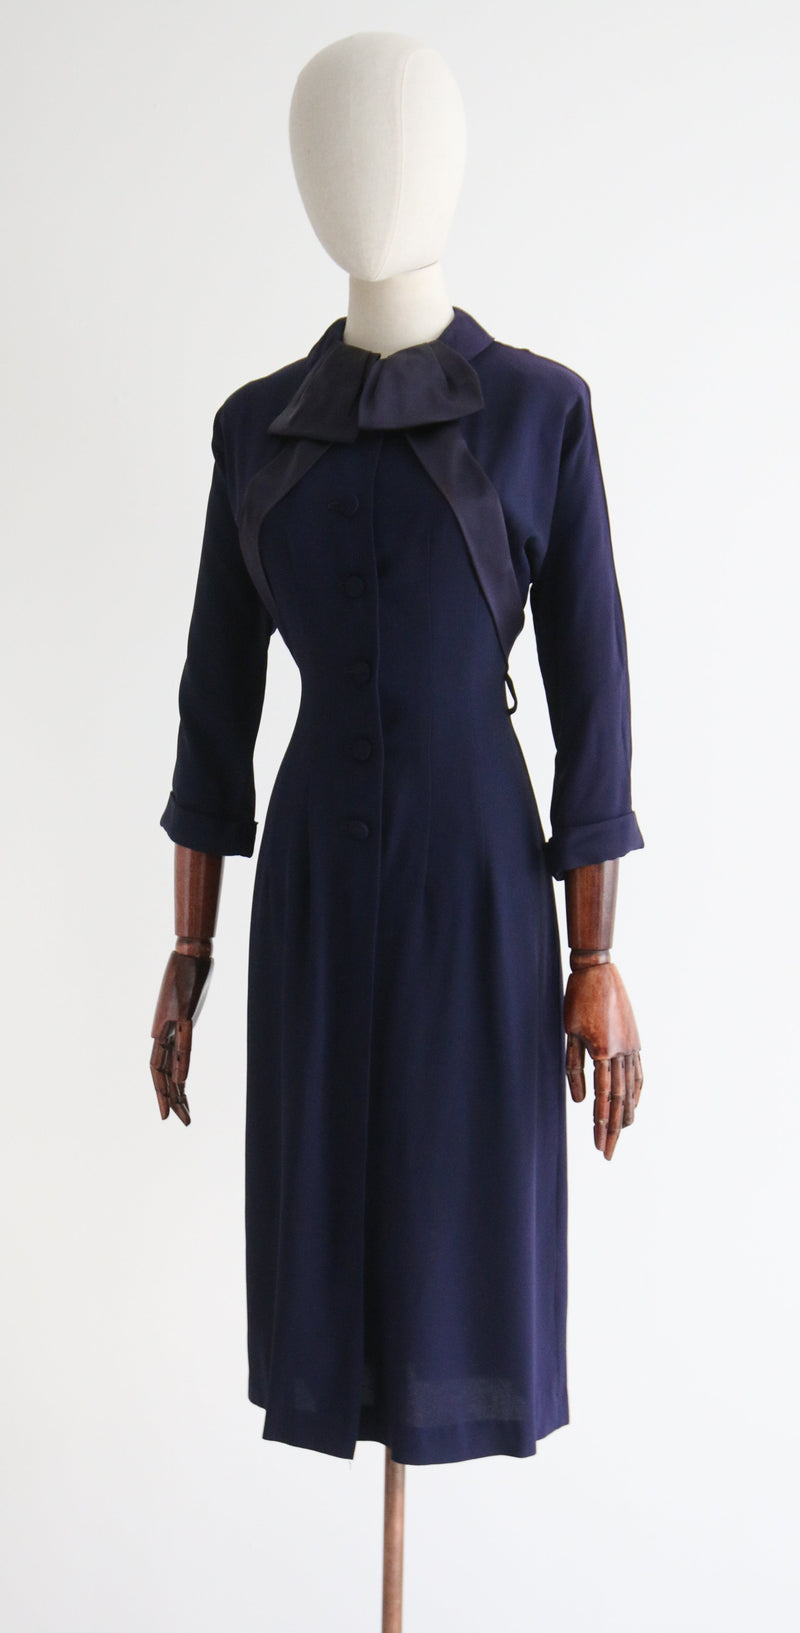 "Navy Ribbon & Tailoring" Vintage 1940's Navy Blue Fitted Dress UK 10 US 6